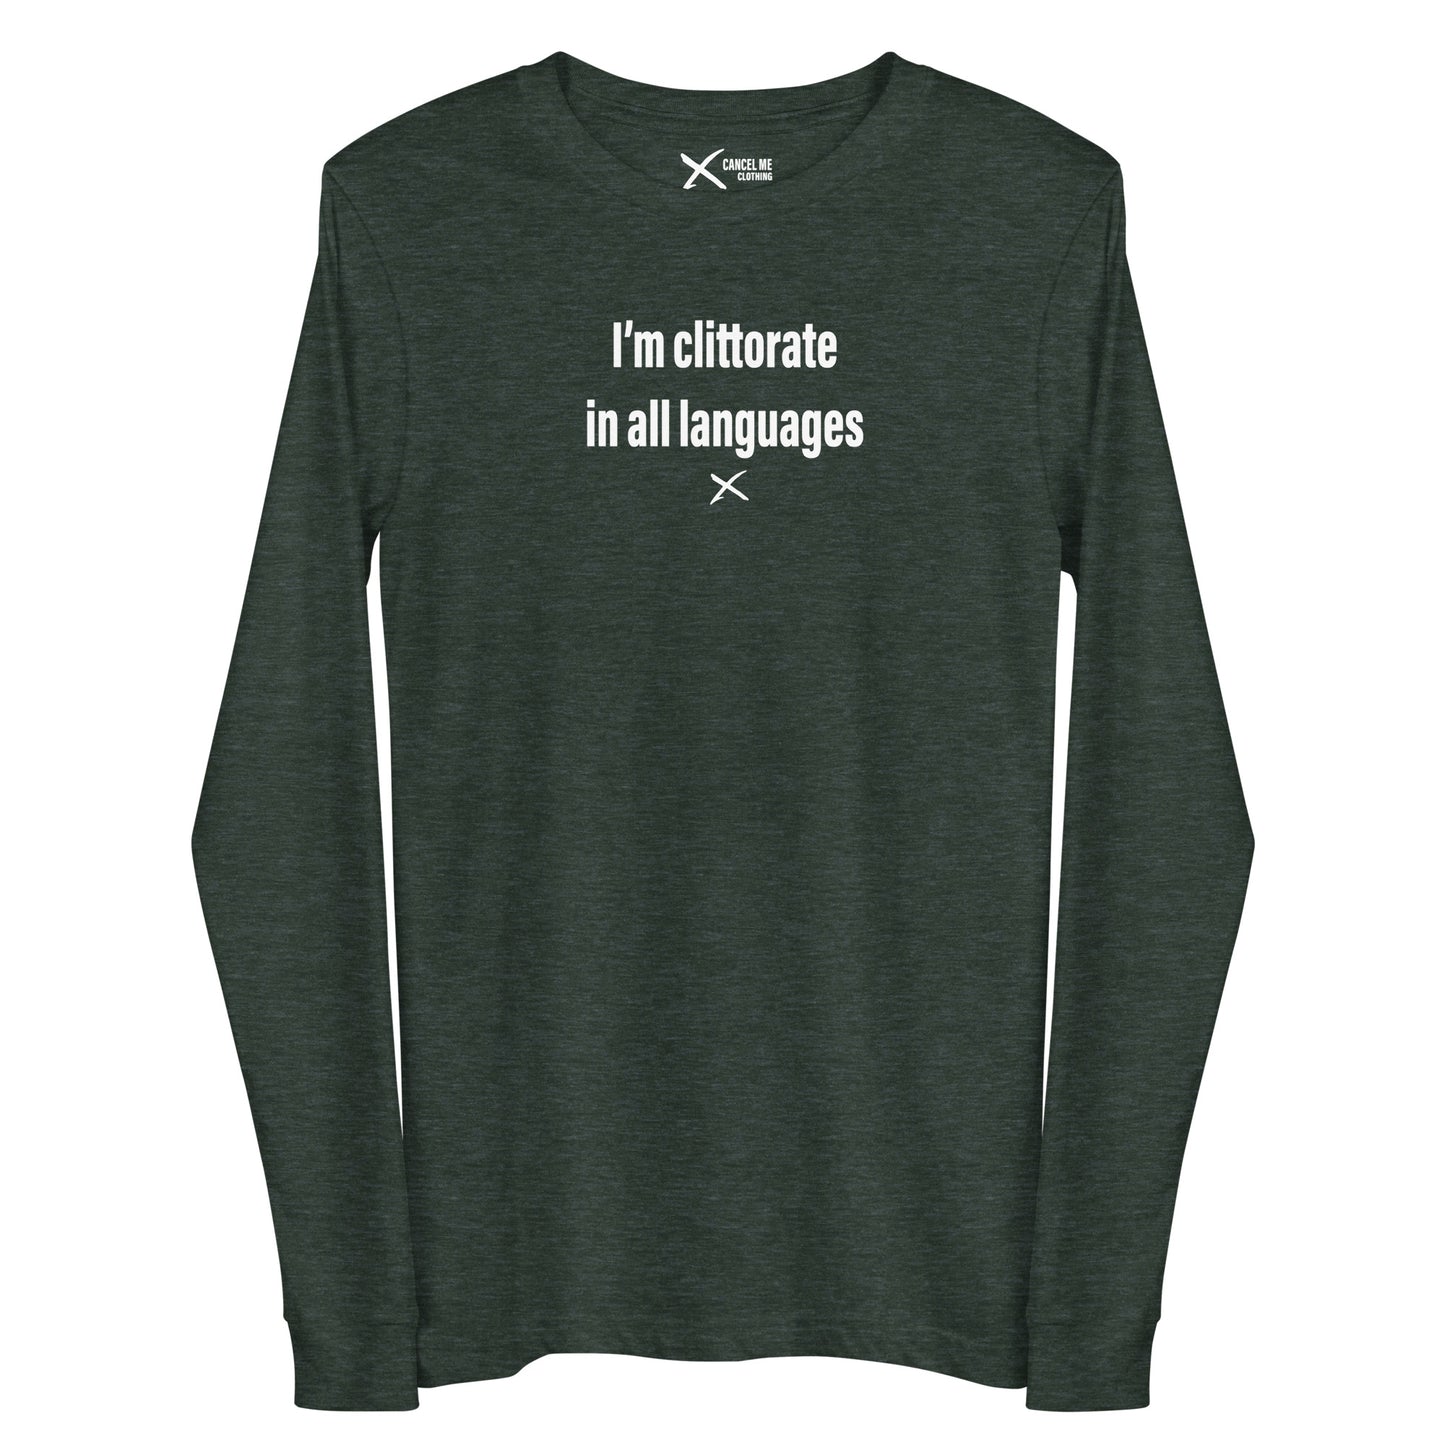 I'm clittorate in all languages - Longsleeve